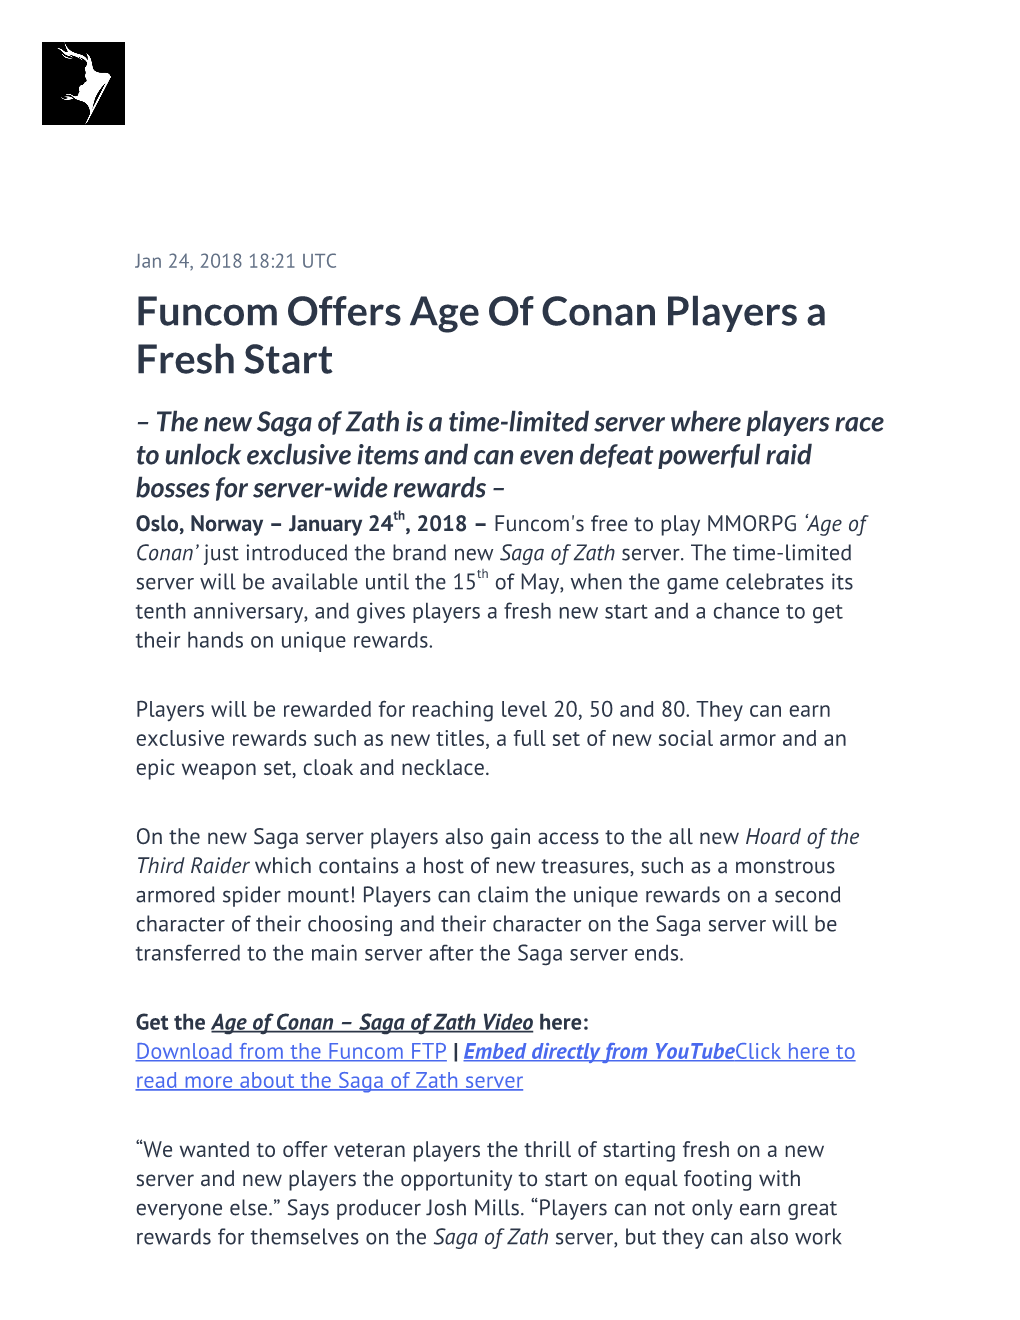 Funcom Offers Age of Conan Players a Fresh Start